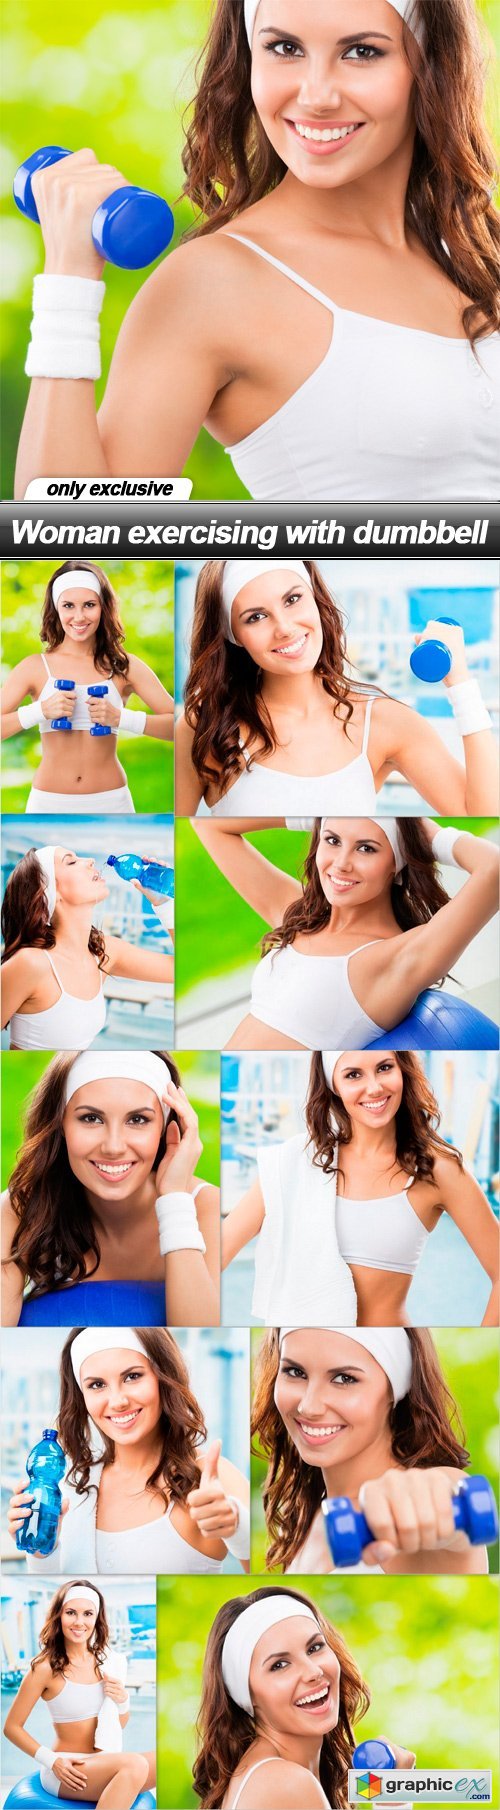 Woman exercising with dumbbell - 11 UHQ JPEG